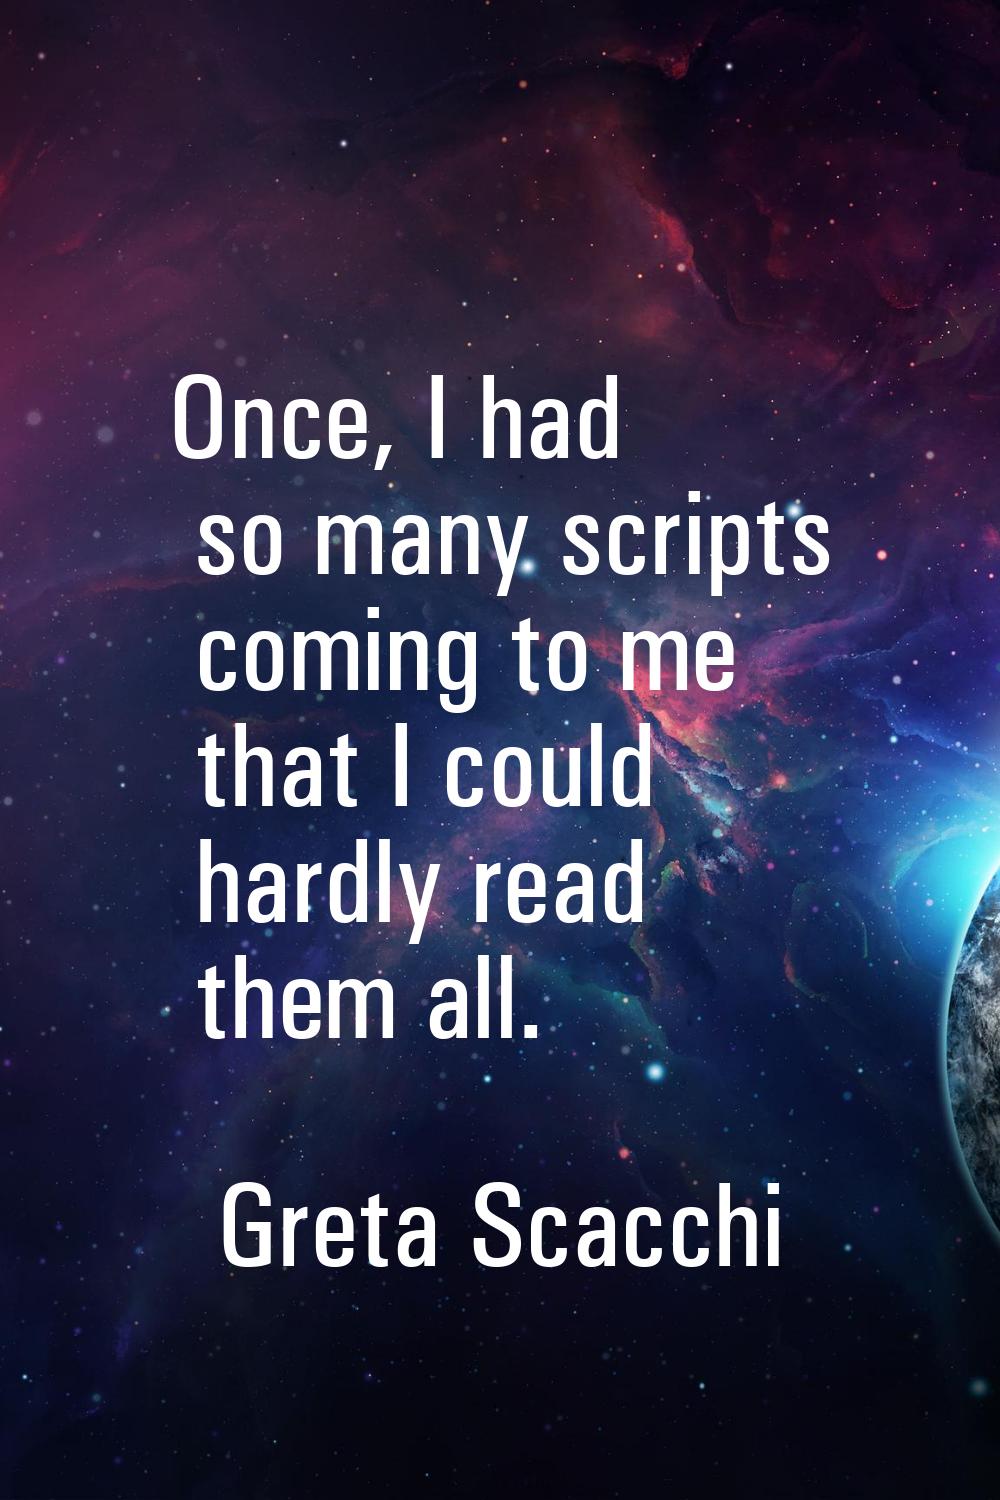 Once, I had so many scripts coming to me that I could hardly read them all.